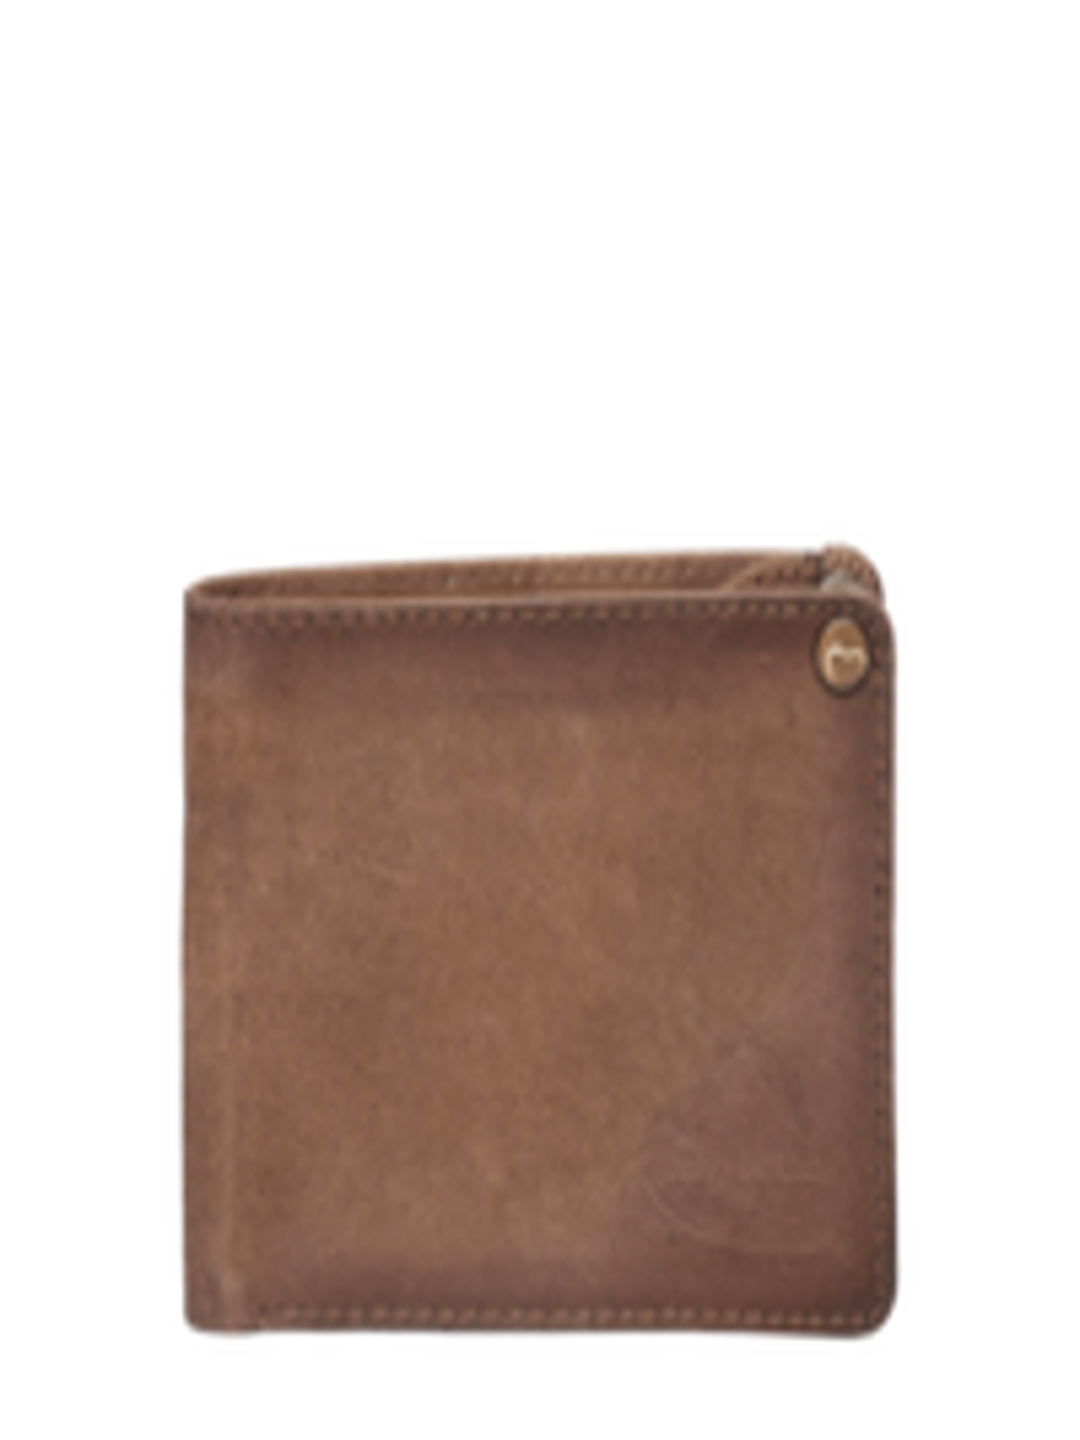 Buy Being Human Men Brown Leather Wallet - Wallets for Men 917120 | Myntra